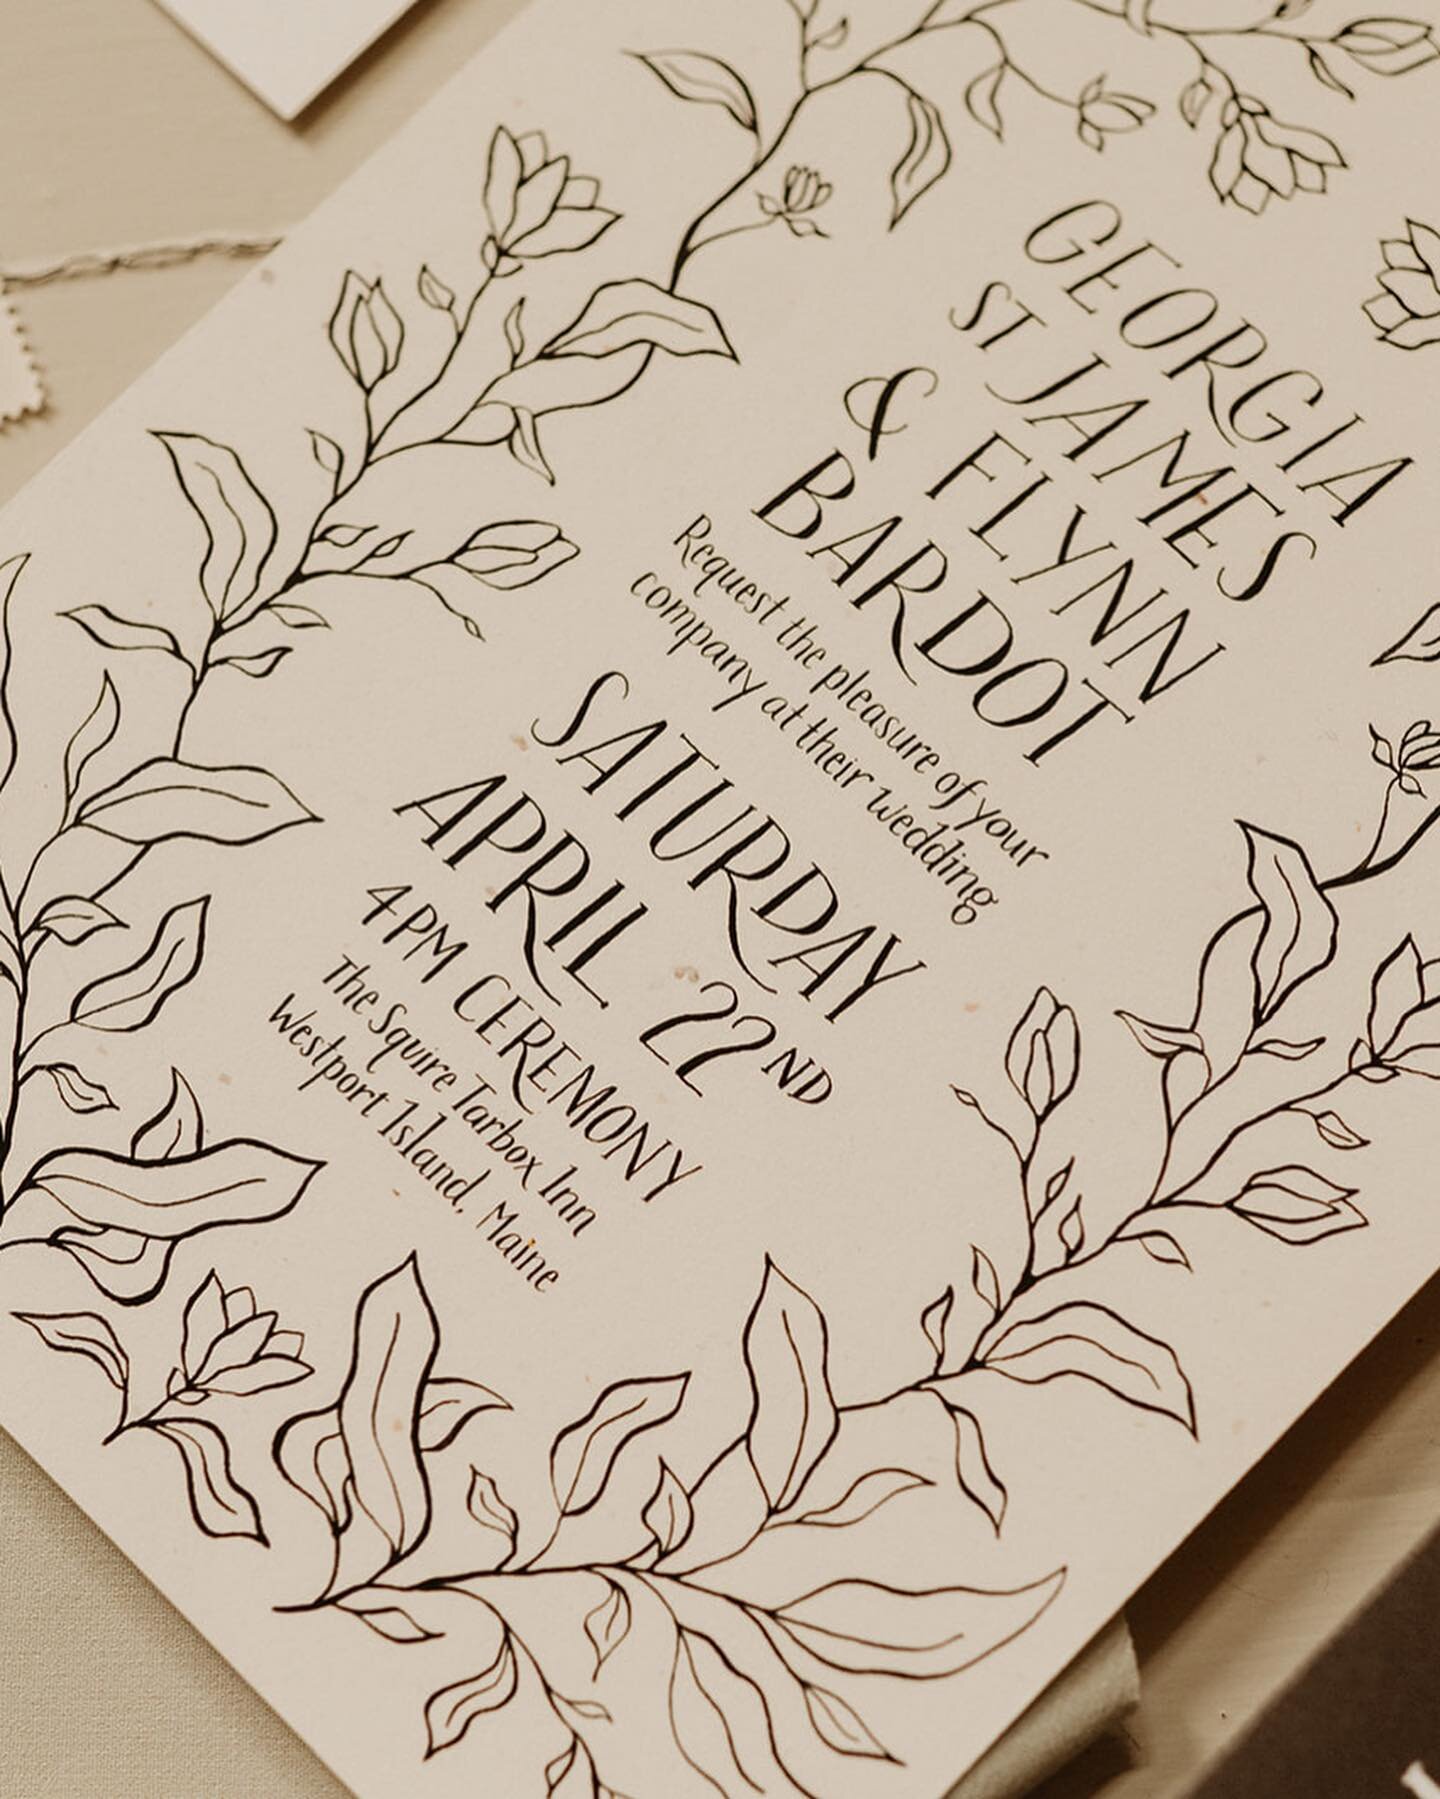 Was thrilled to create both the stationery suite for this shoot as well as the florals! Thanks @jesspancake_, @katelynmallettphoto and @thesquiretarboxinn for having me aboard! ✨

#weddingstationery #stationery #custominvitations #customlettering #le